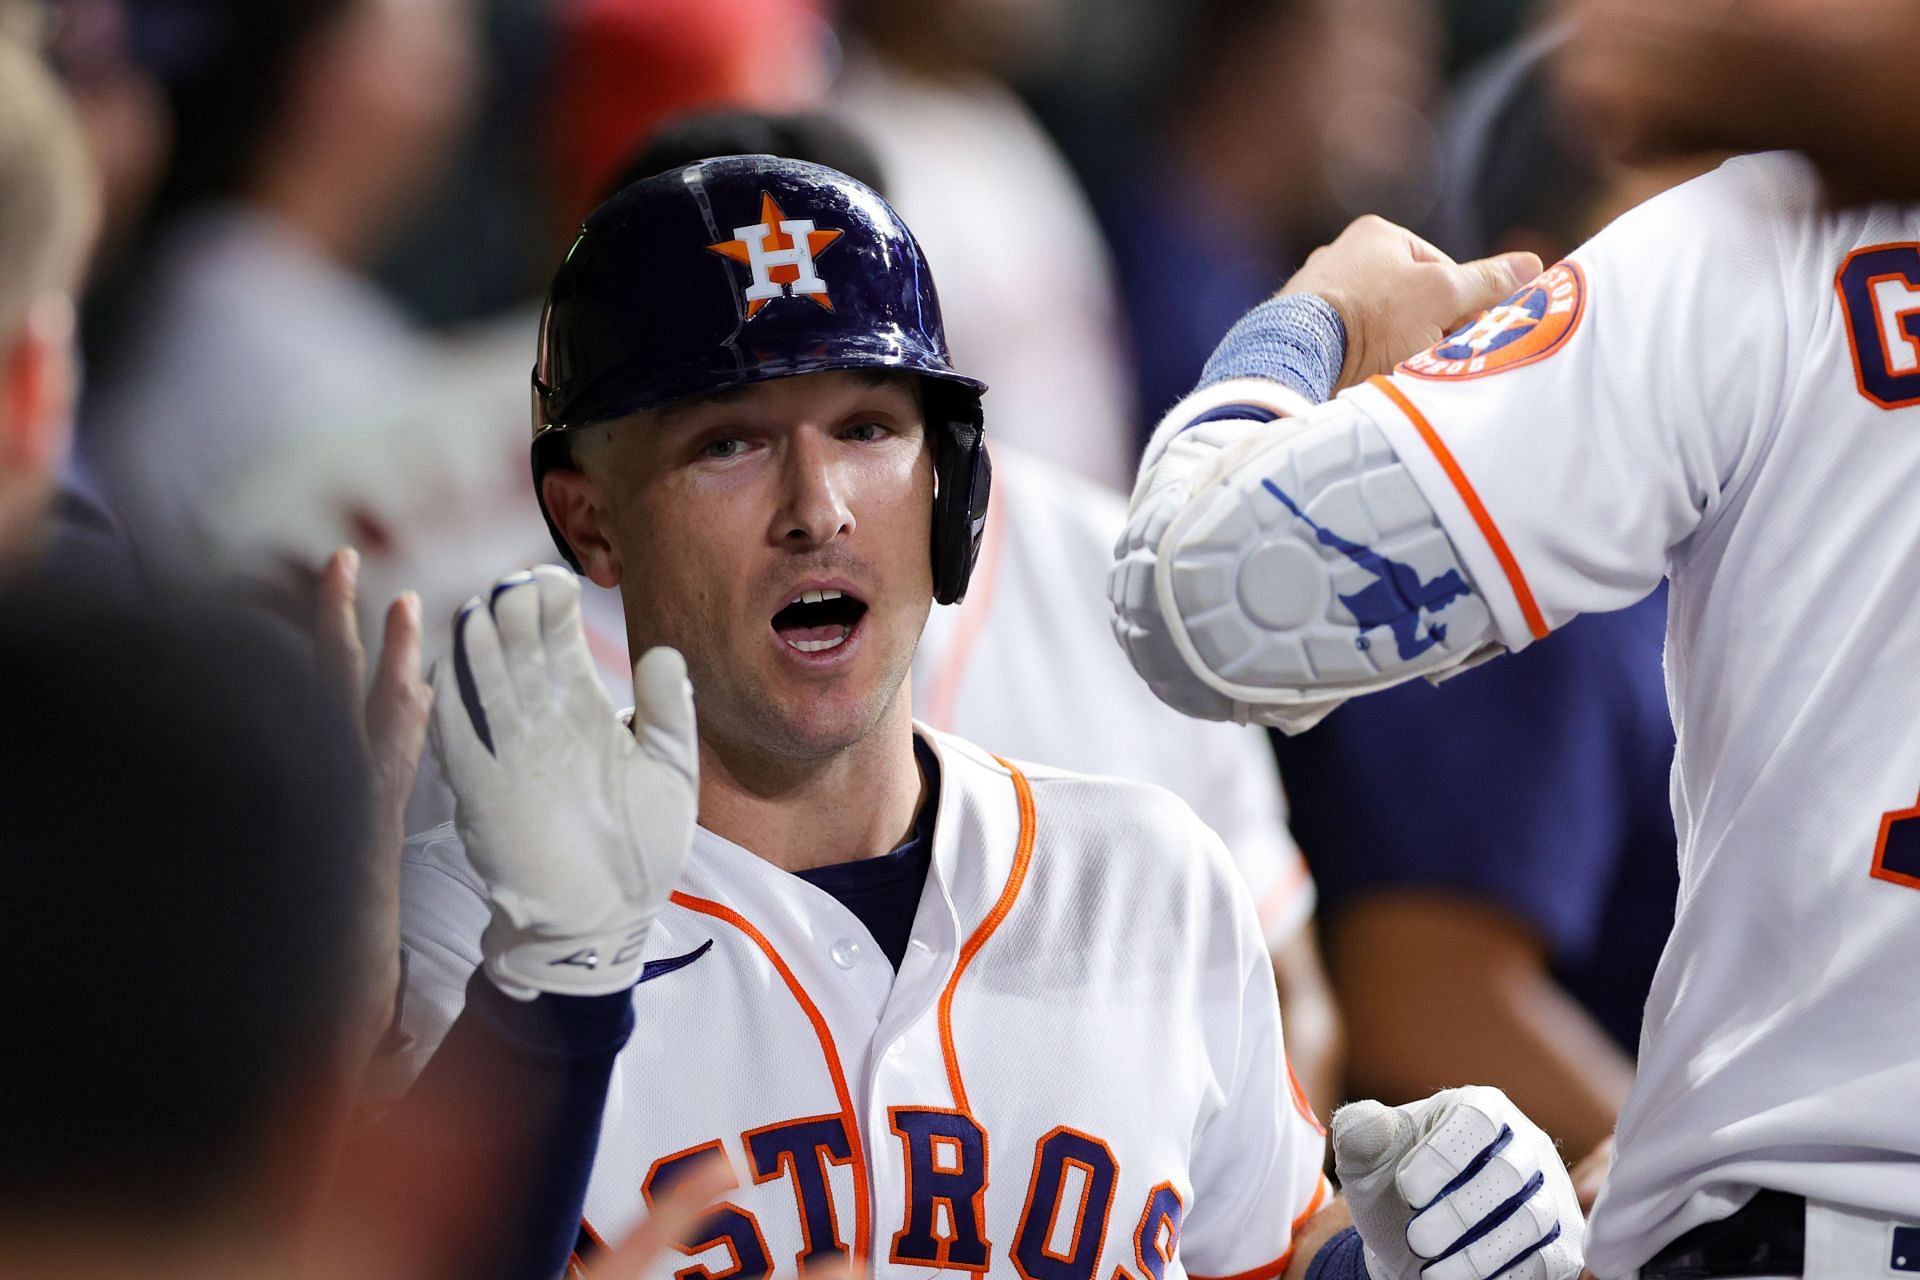 Alex Bregman will be a key player for the Astros in the postseason this year.